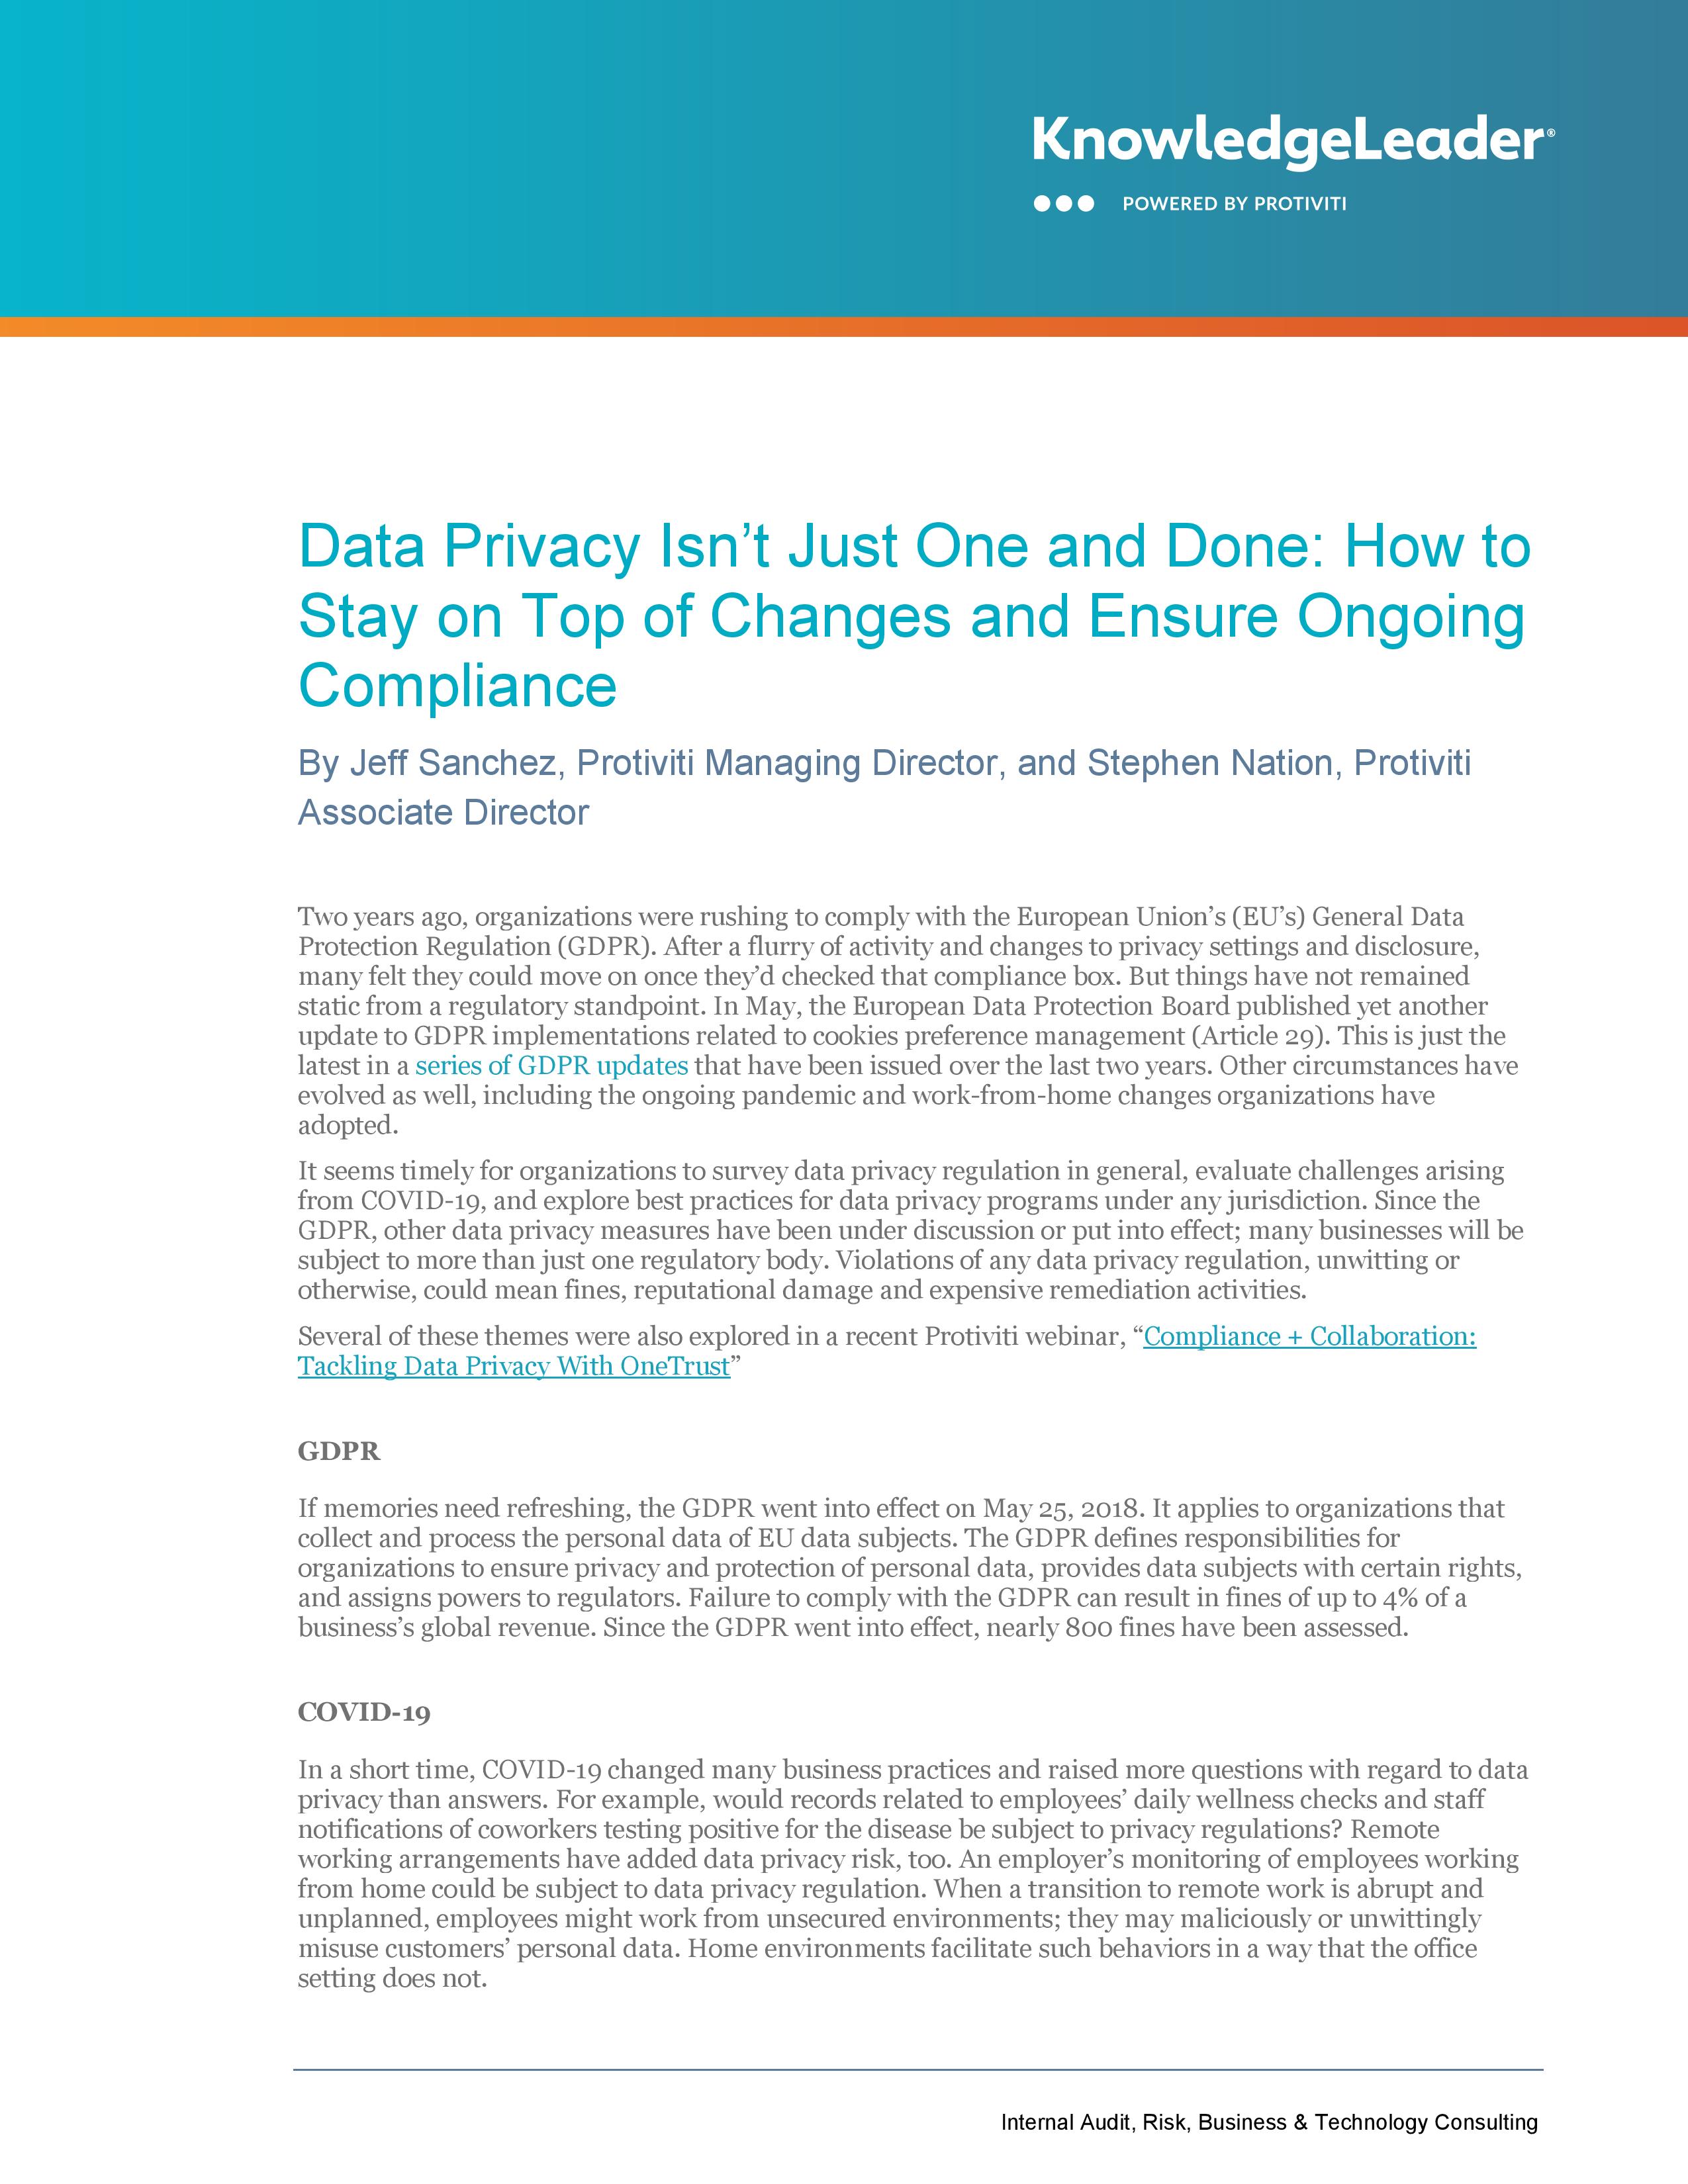 Screenshot of the first page of Data Privacy Isn’t Just One and Done: How to Stay on Top of Changes and Ensure Ongoing Compliance